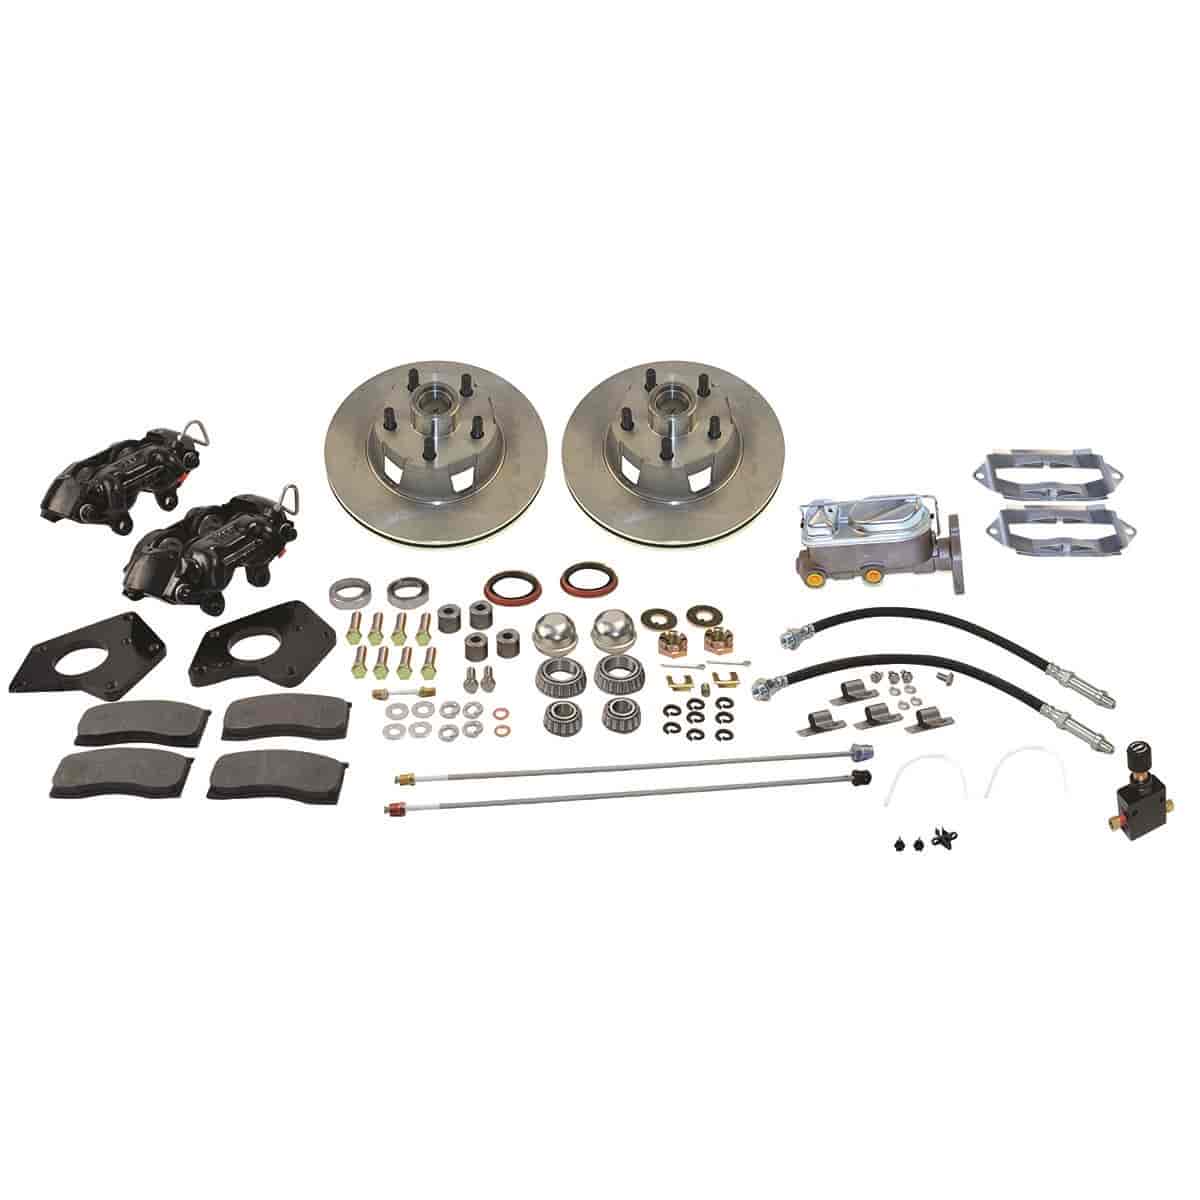 Front 4-Piston Drum to Disc Brake Conversion Kit See More Details For Applictions